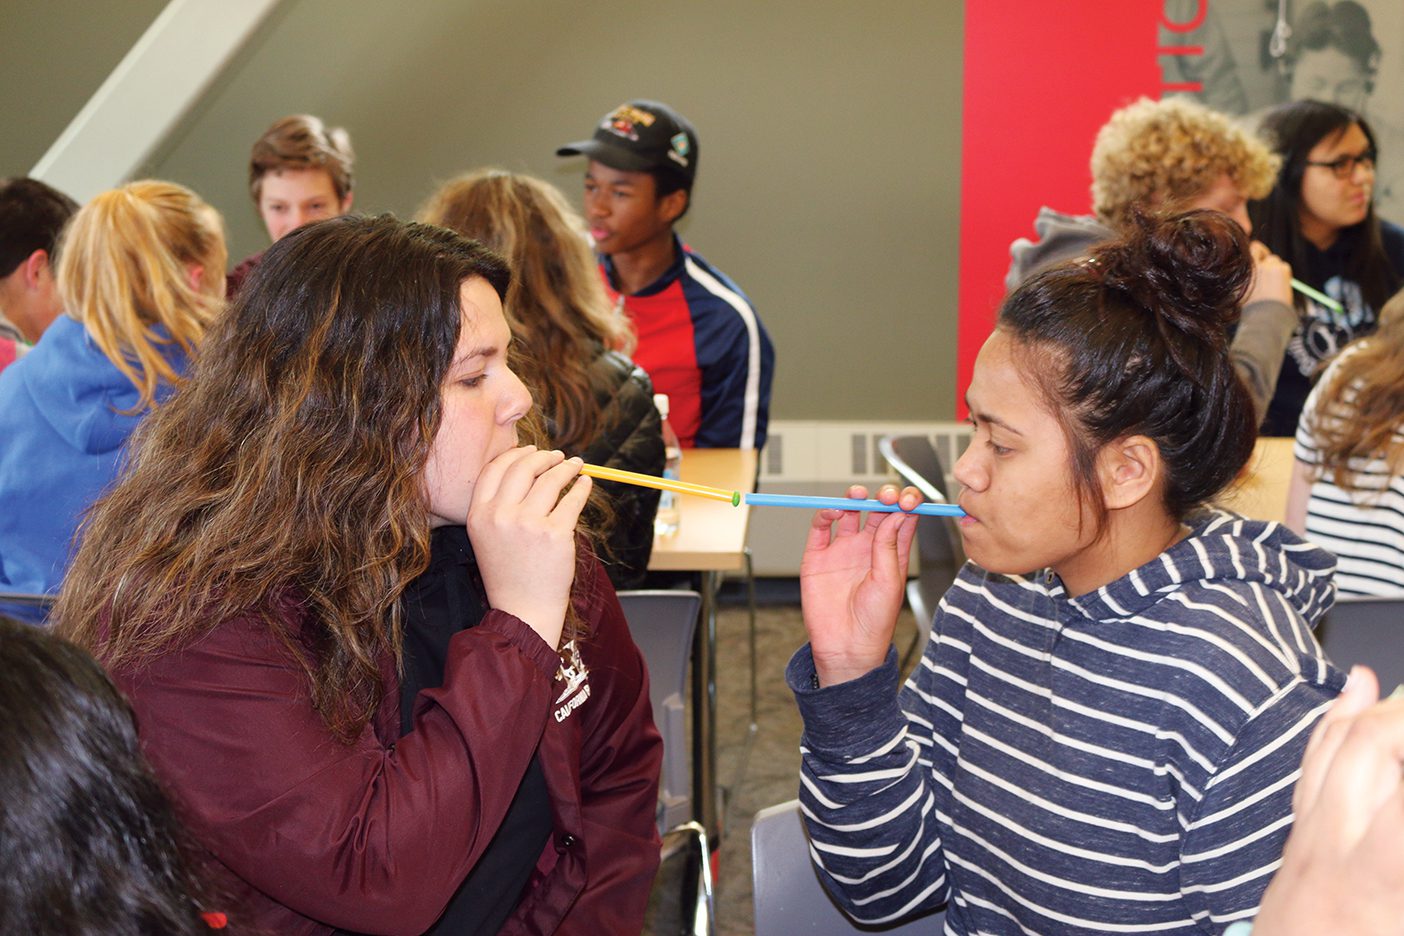 In a get-to-know-you game, two students with straws in their mouths pass a skittle to each other by sucking on straws.